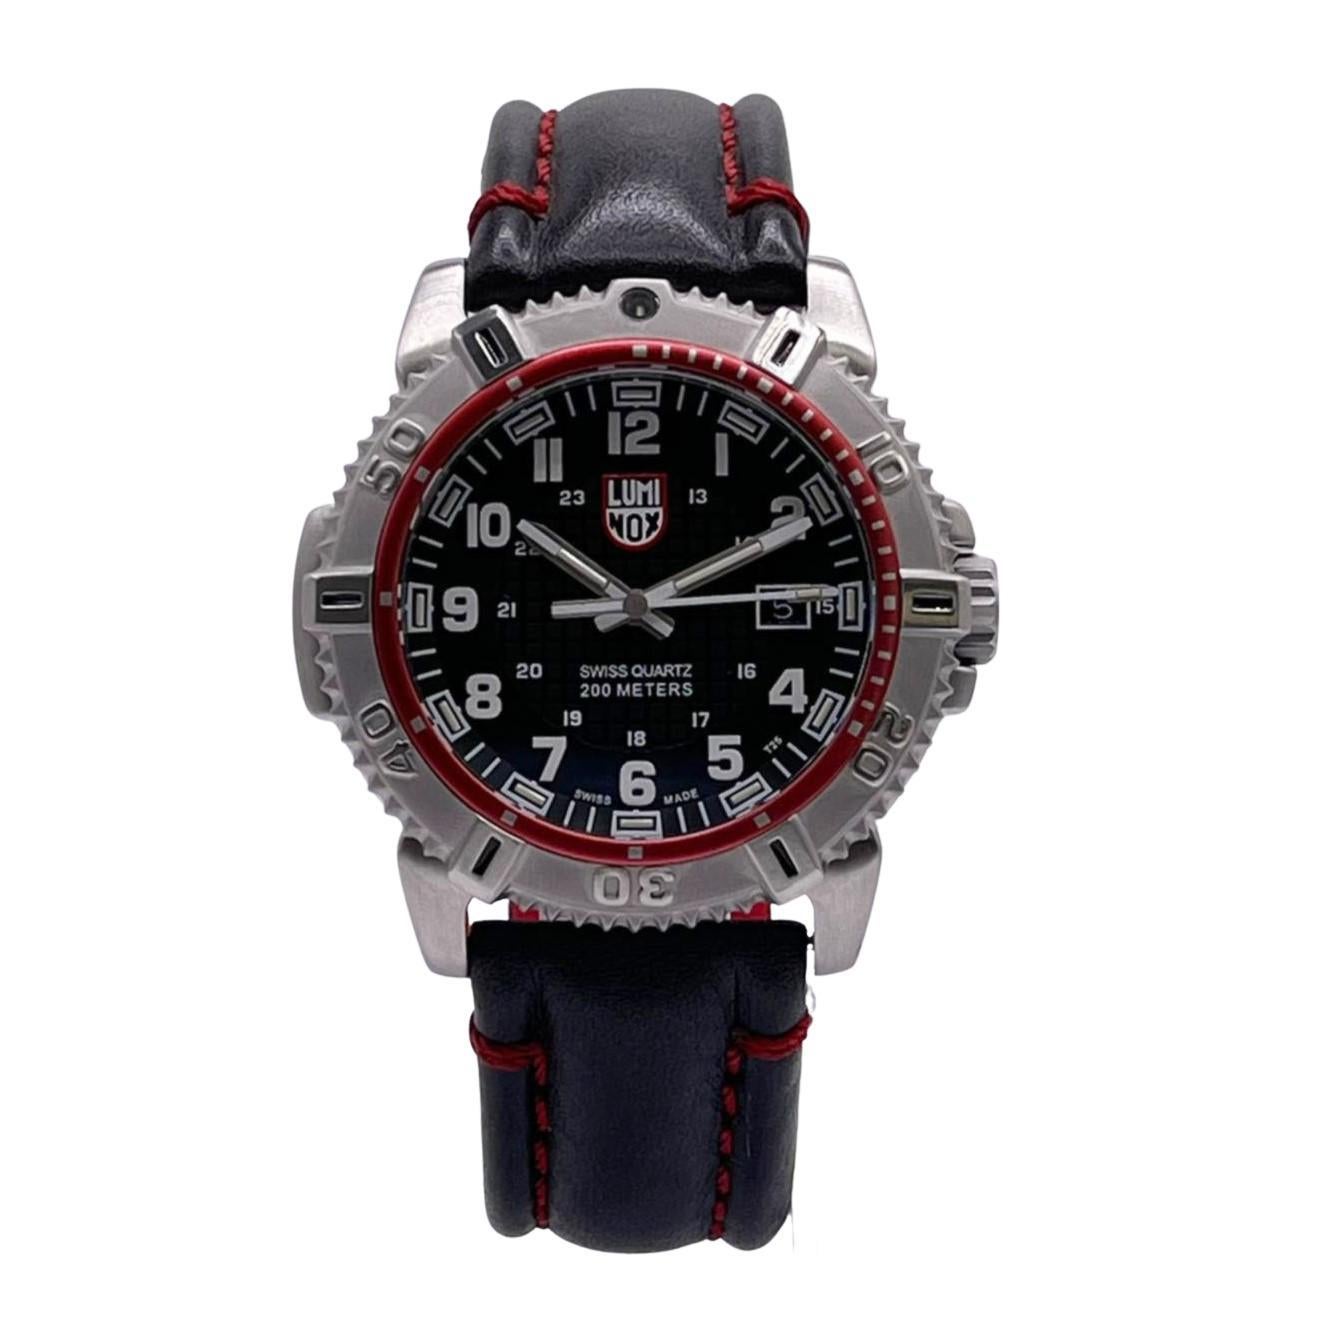 Unworn Luminox Modern Mariner Men's Watch XS.6265. This Timepiece is powered by Quartz (battery) movement with features: Stainless Steel case and Leather two-piece strap with stainless steel buckle lock. Unidirectional rotating bezel, Black Dial